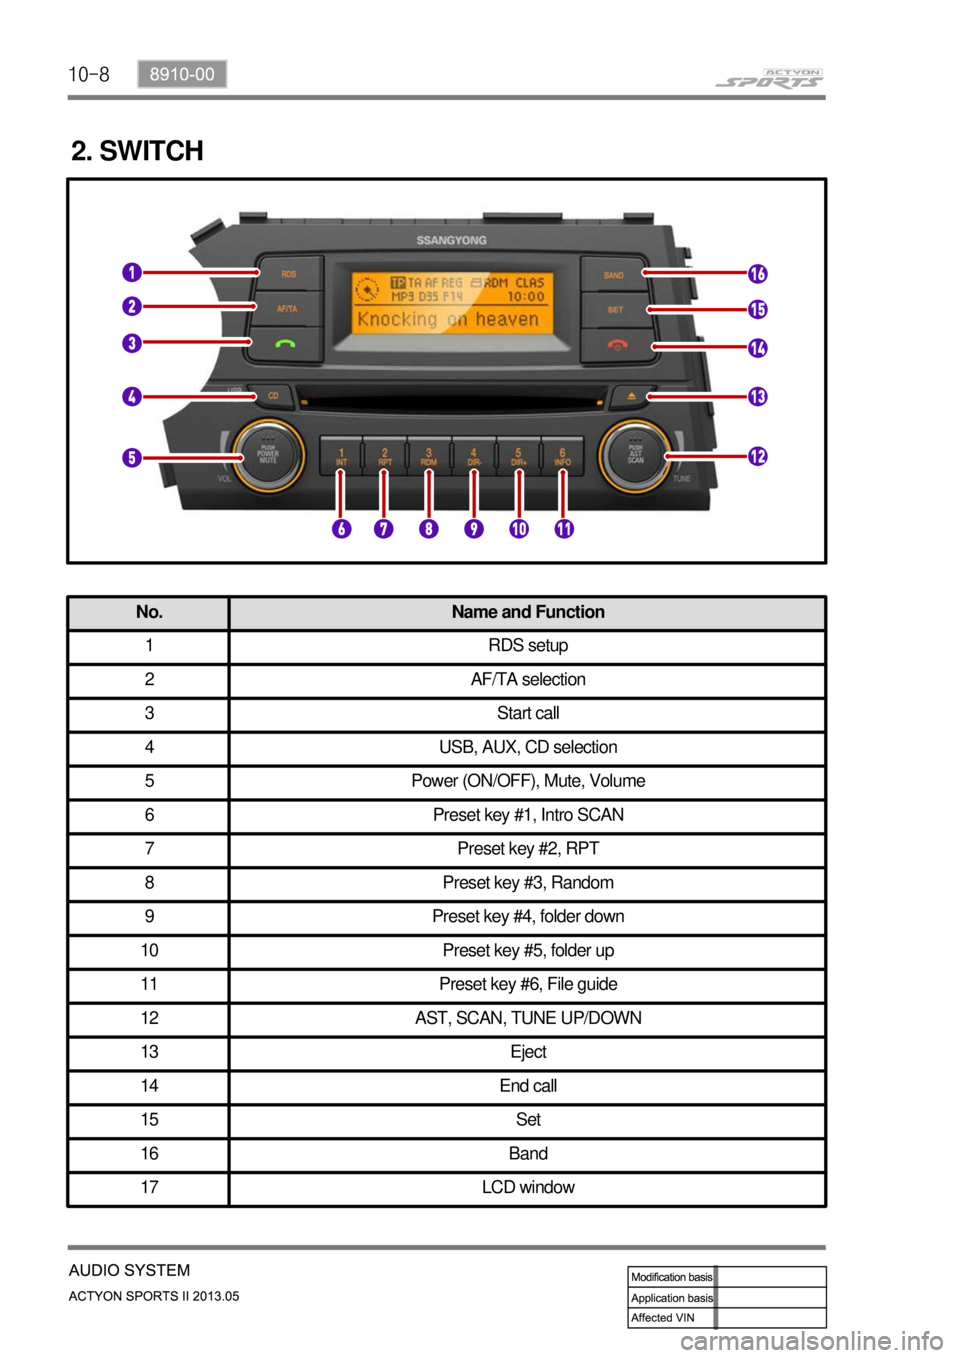 SSANGYONG NEW ACTYON SPORTS 2013  Service Manual 10-8
2. SWITCH
No. Name and Function
1 RDS setup
2 AF/TA selection
3 Start call
4 USB, AUX, CD selection
5 Power (ON/OFF), Mute, Volume
6 Preset key #1, Intro SCAN
7 Preset key #2, RPT
8 Preset key #3